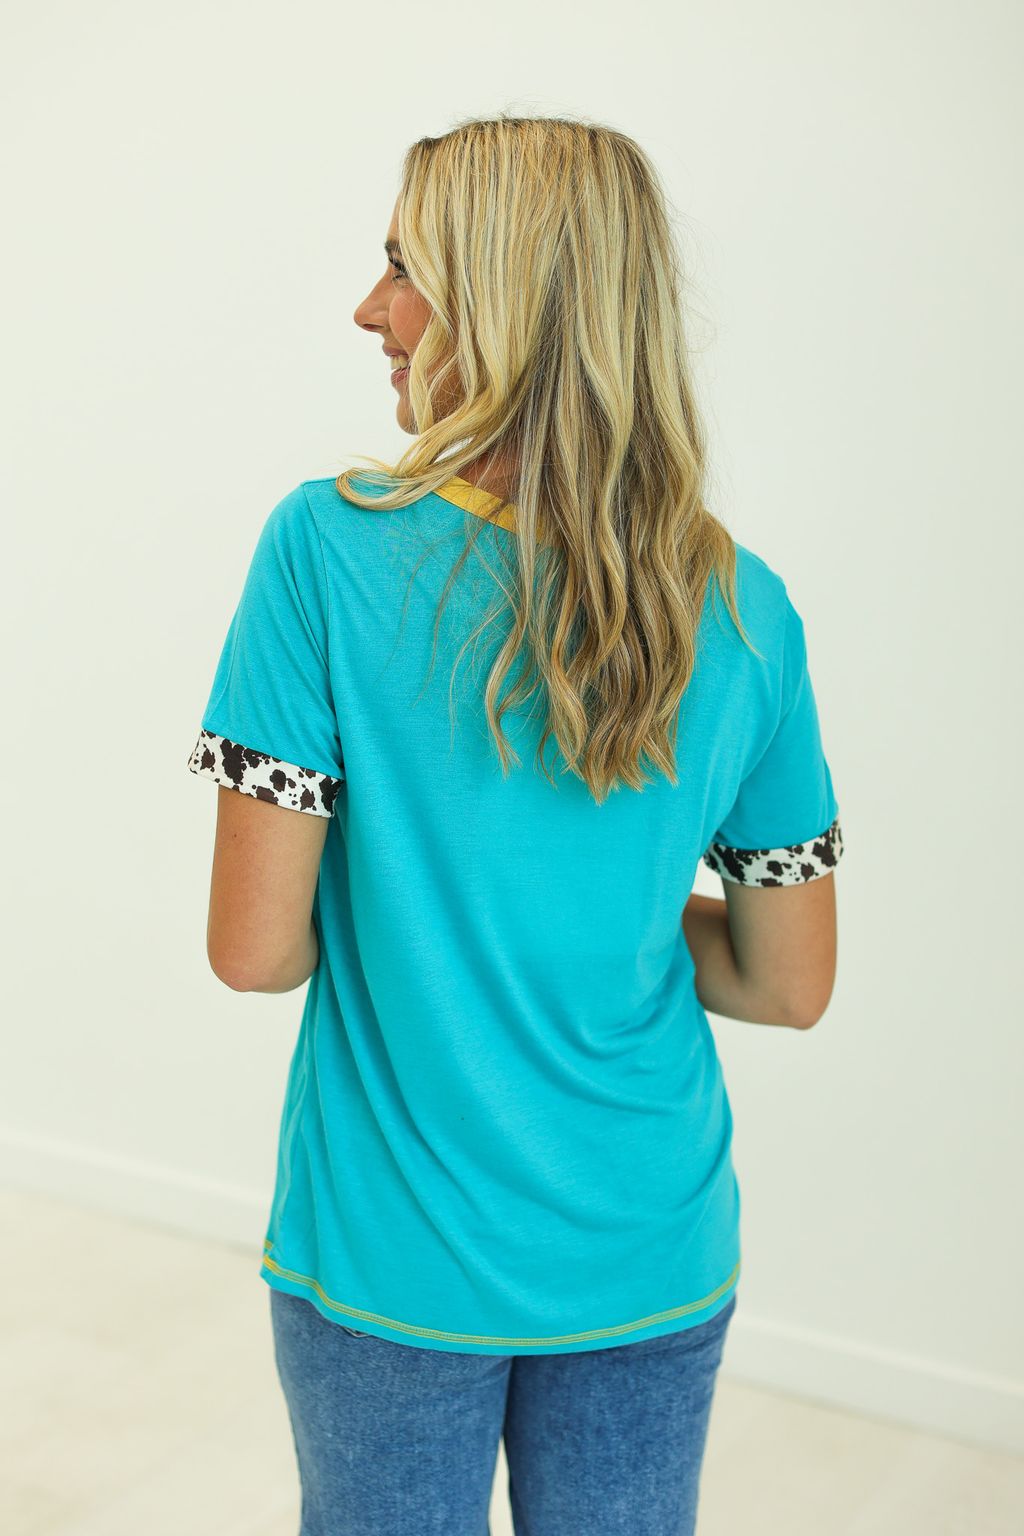 Country Bumpkin Patch Turquoise Ringer Tee